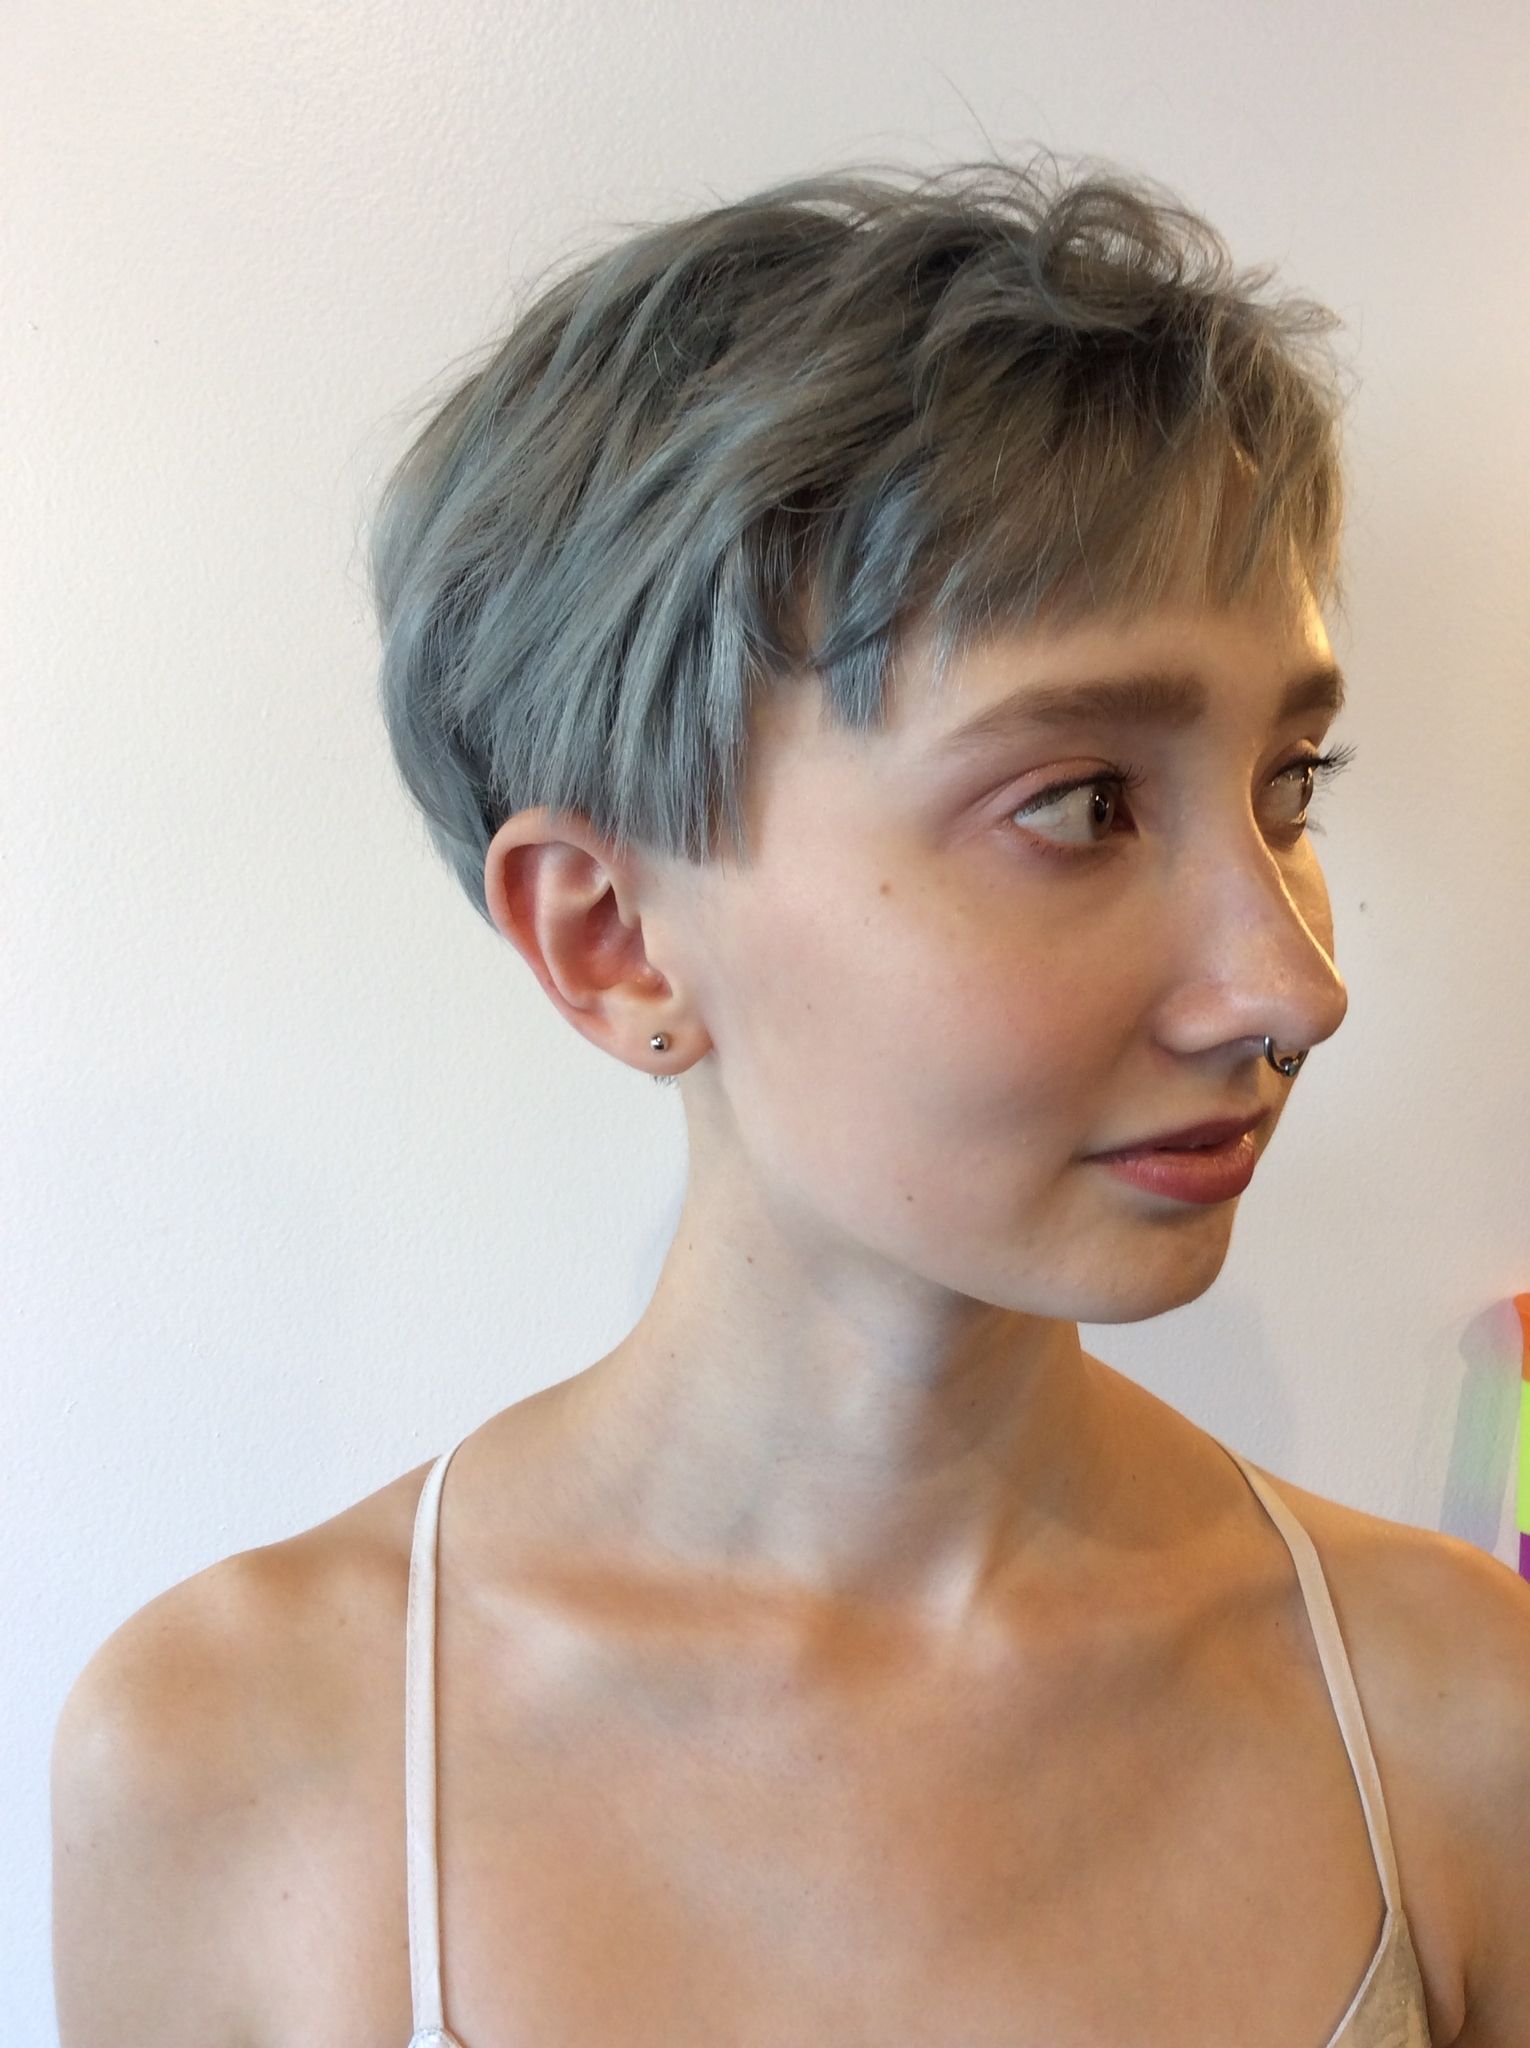 Textured Short Pixie Haircut | Short Women's Haircuts | Pinterest In Most Up To Date Textured Pixie Hairstyles (View 13 of 15)